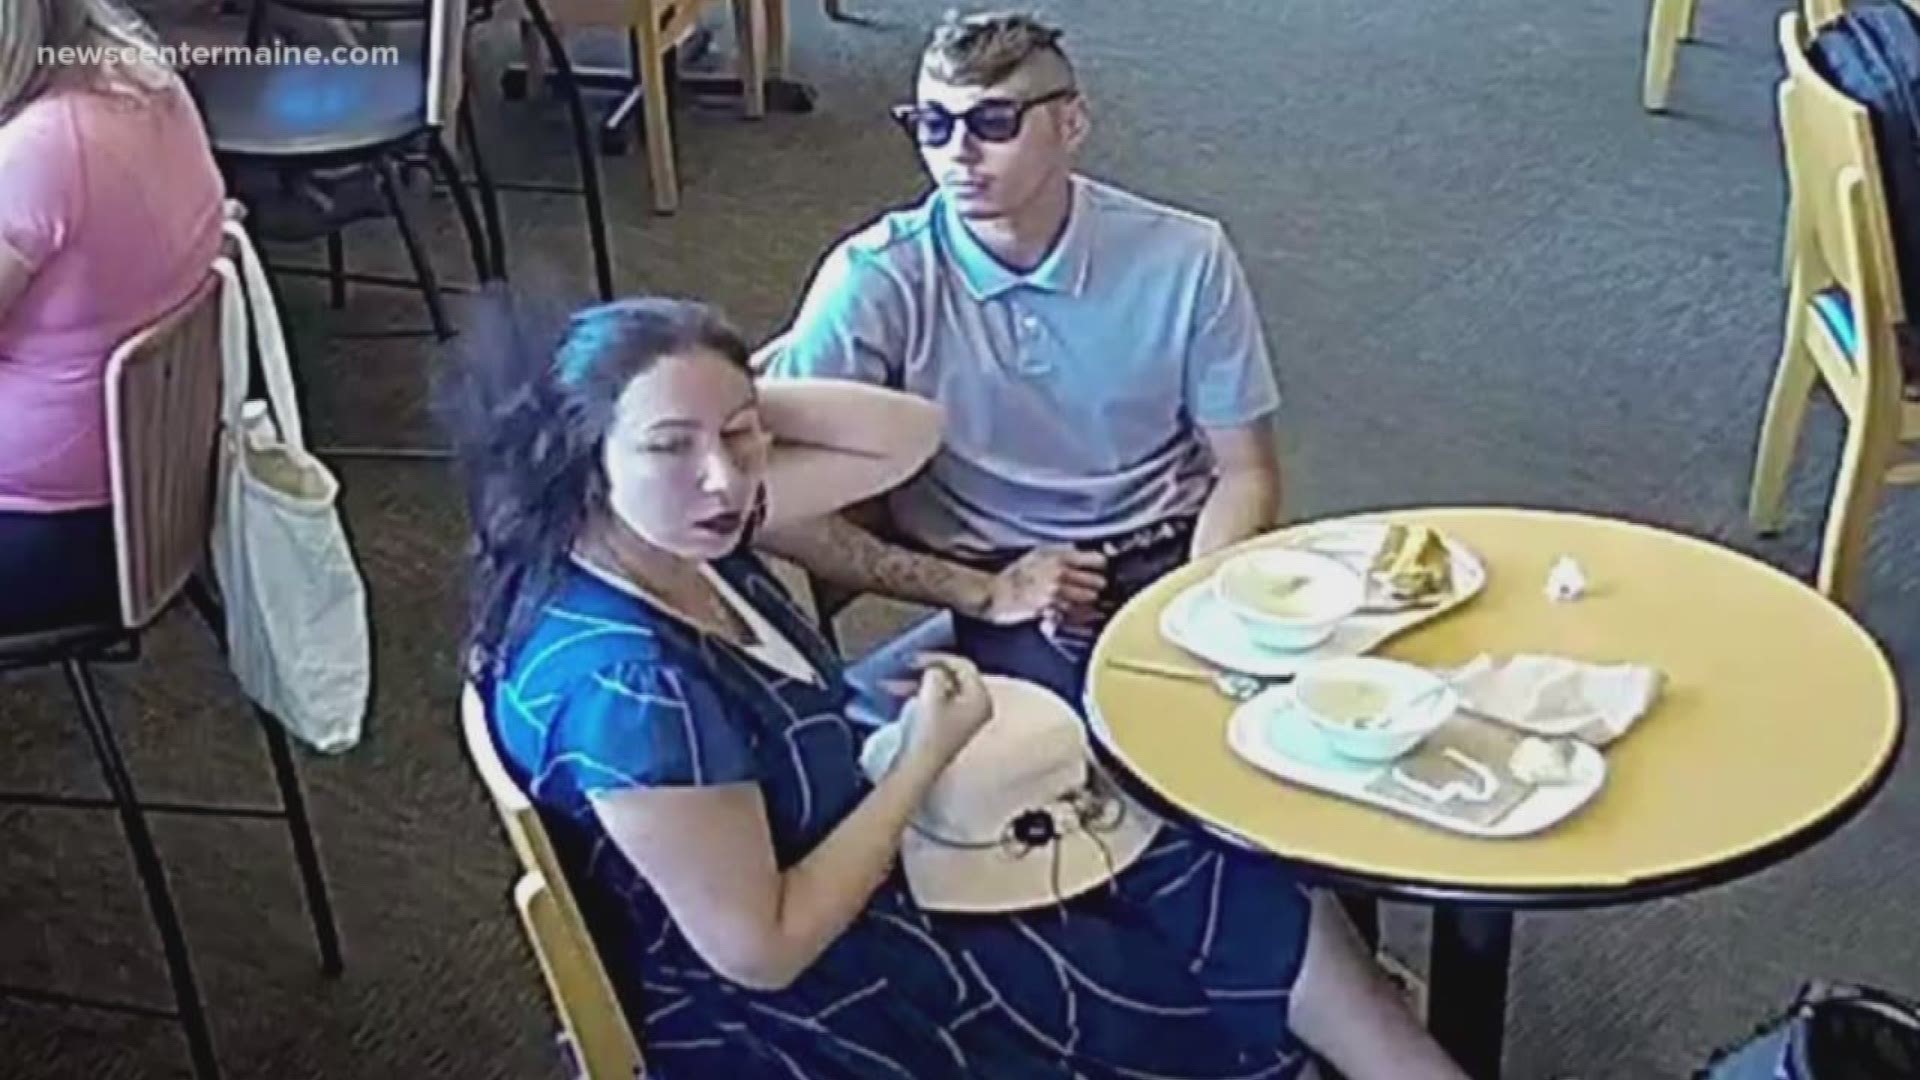 South Portland police say two people caught on surveillance camera are suspected of stealing credit cards while out to eat at a restaurant.